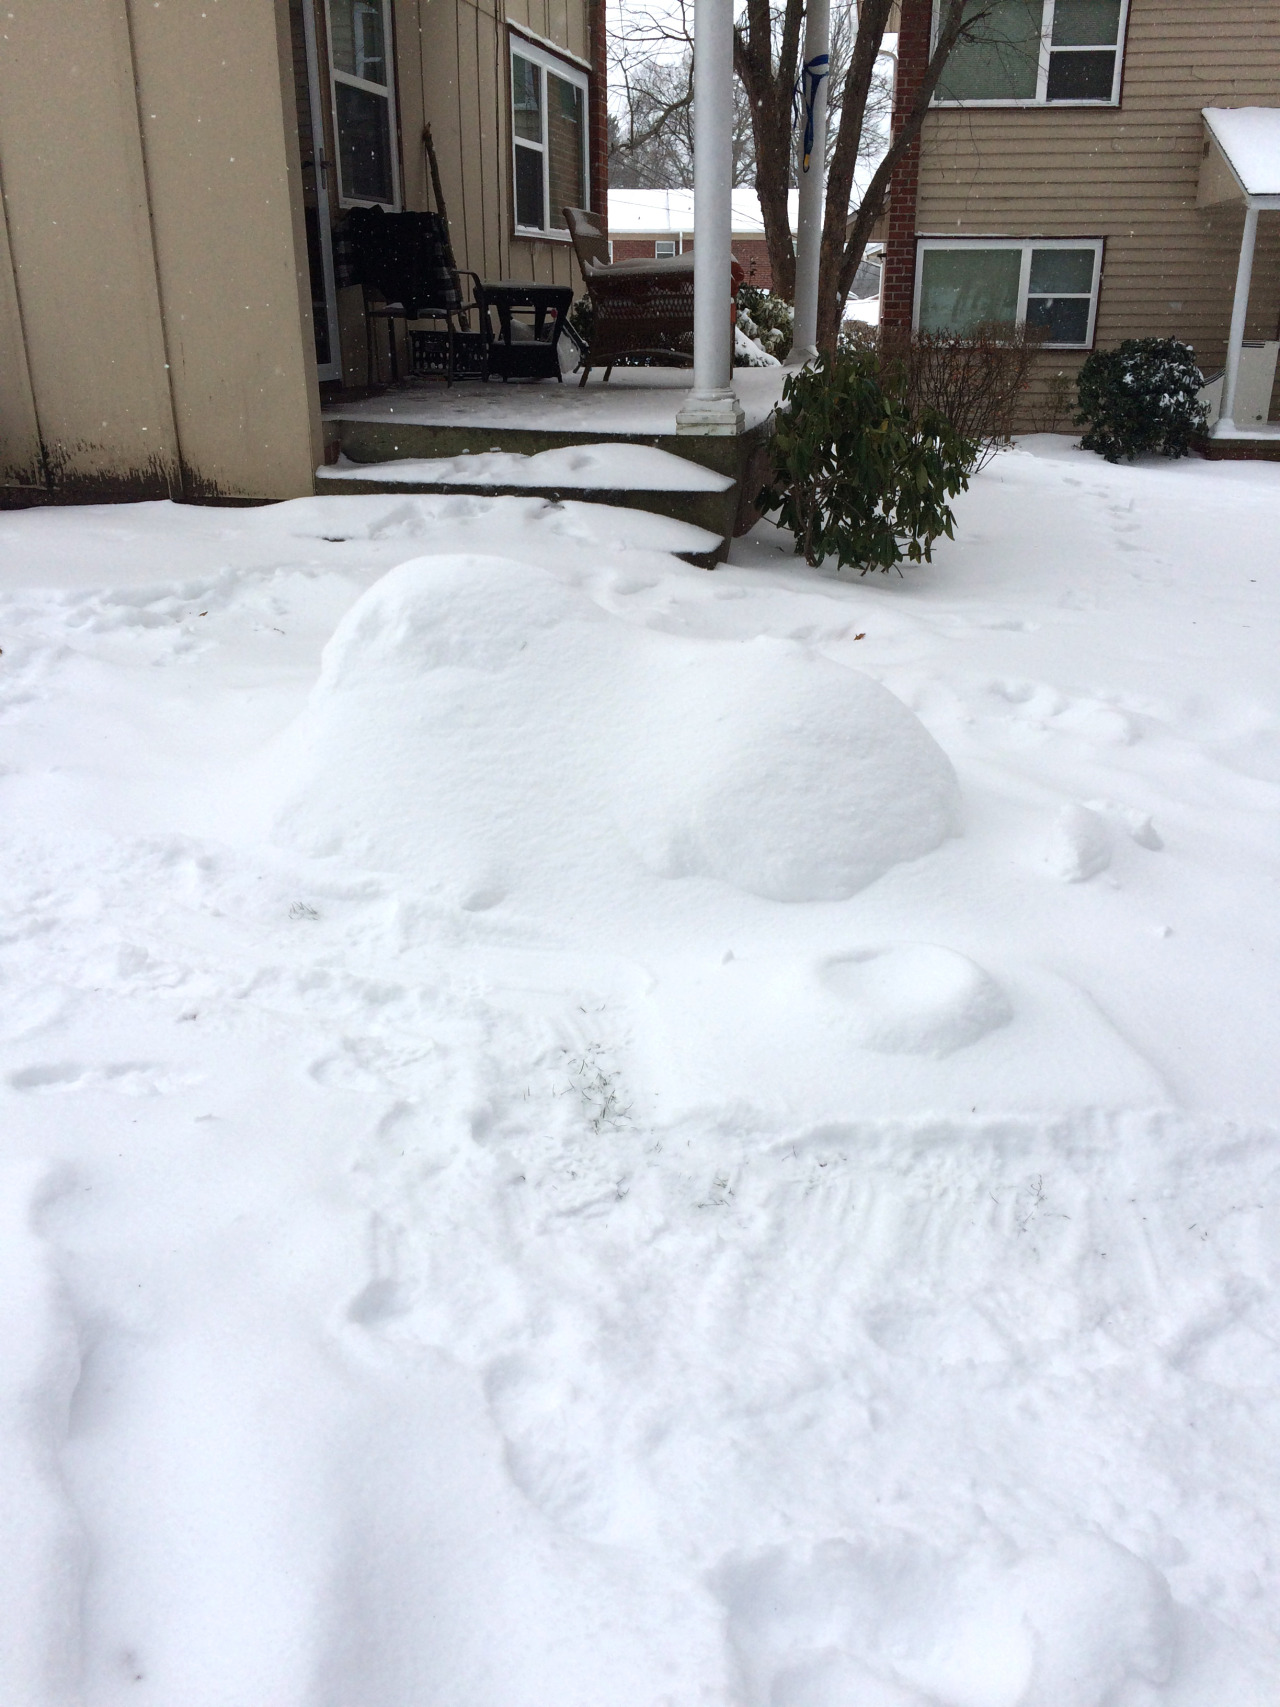 Pheo Draws Things - Yoooo I made a snow Tubbs during my snow day! : D...